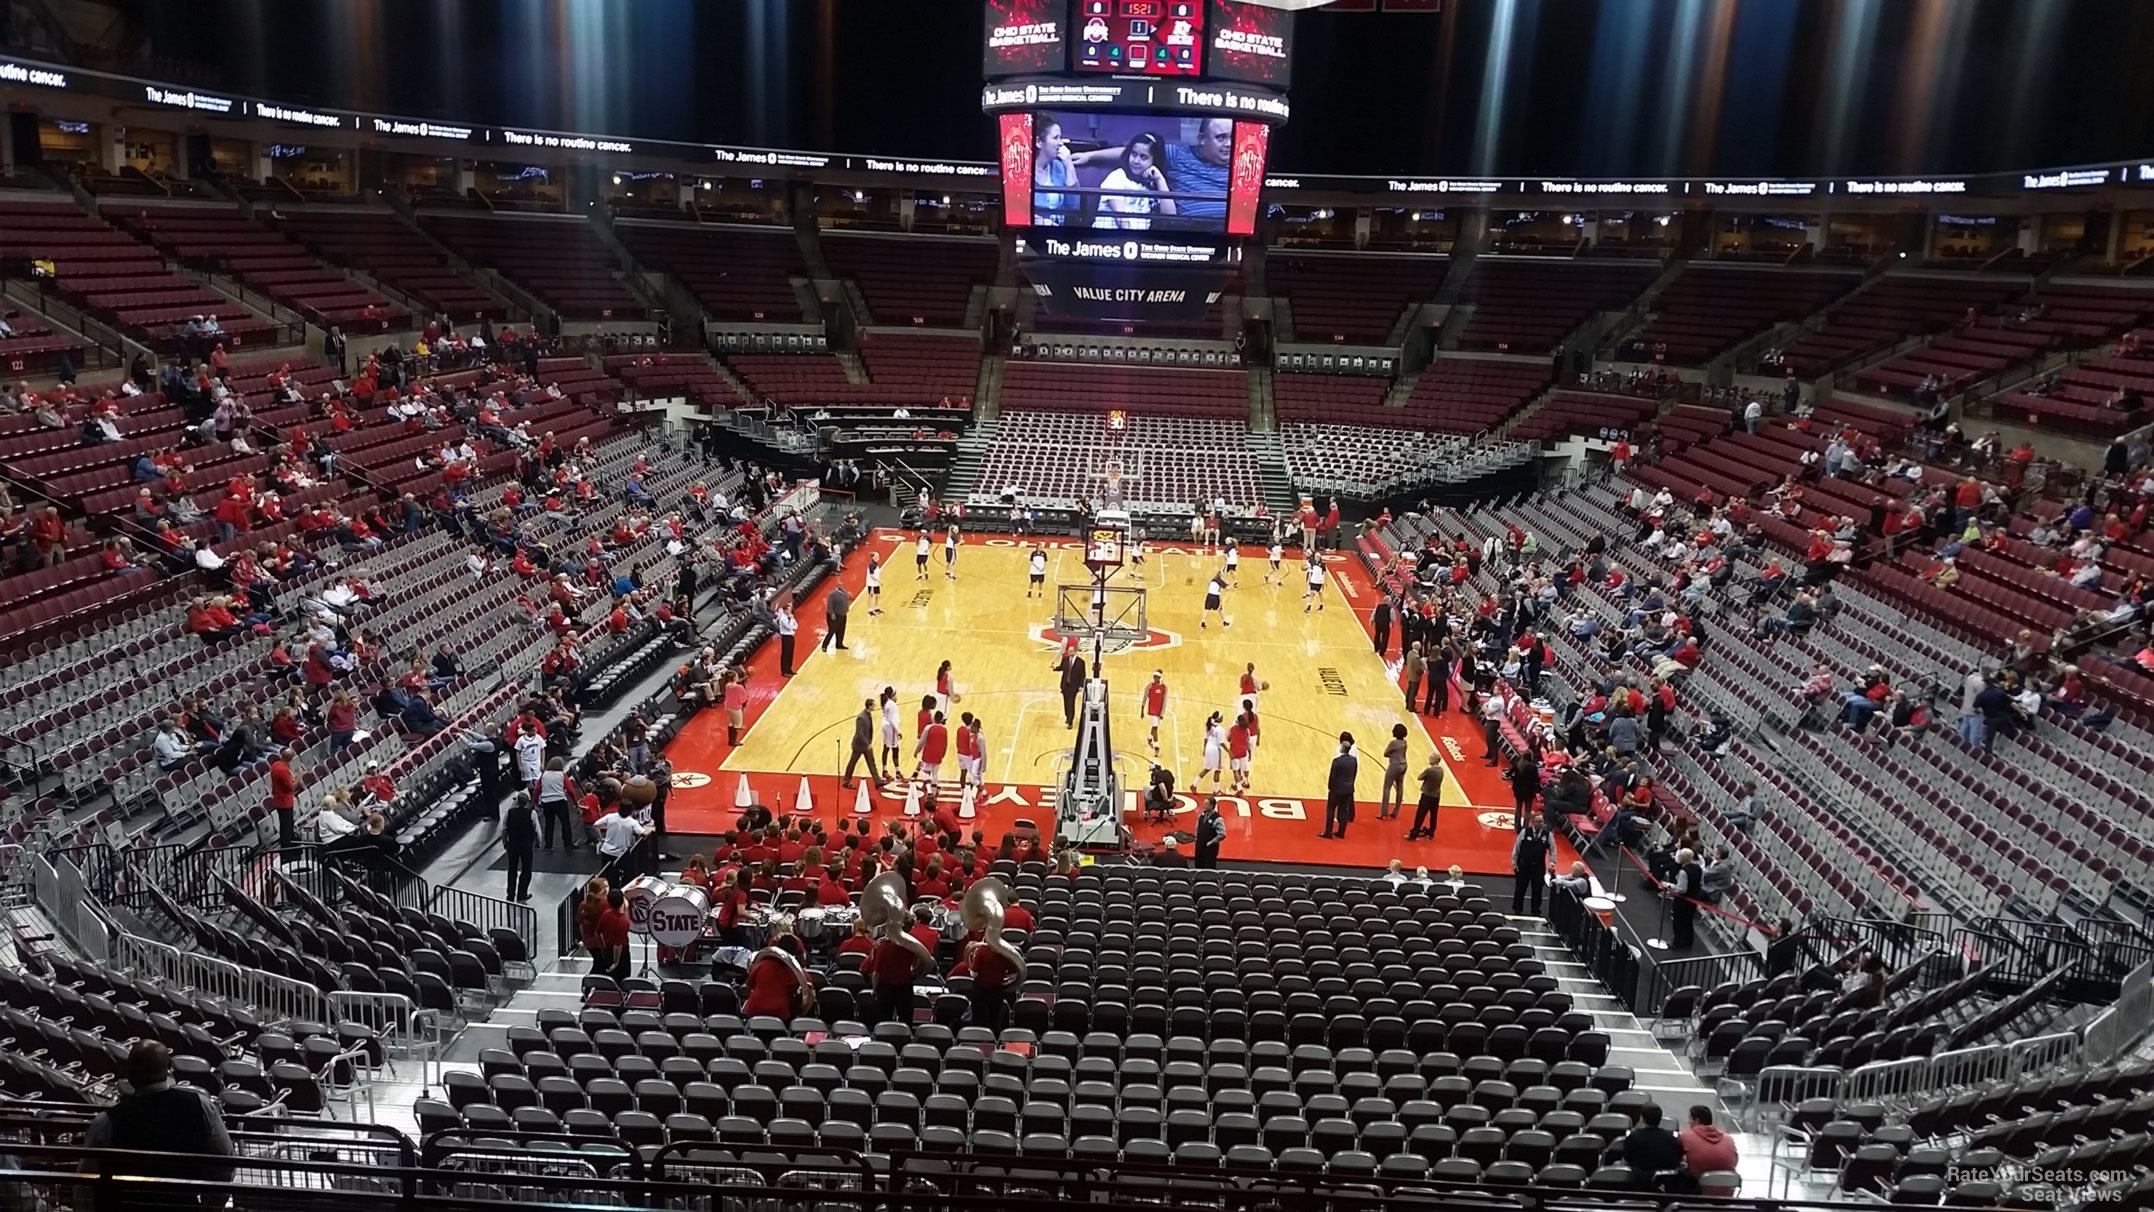 section 214, row h seat view  for basketball - schottenstein center